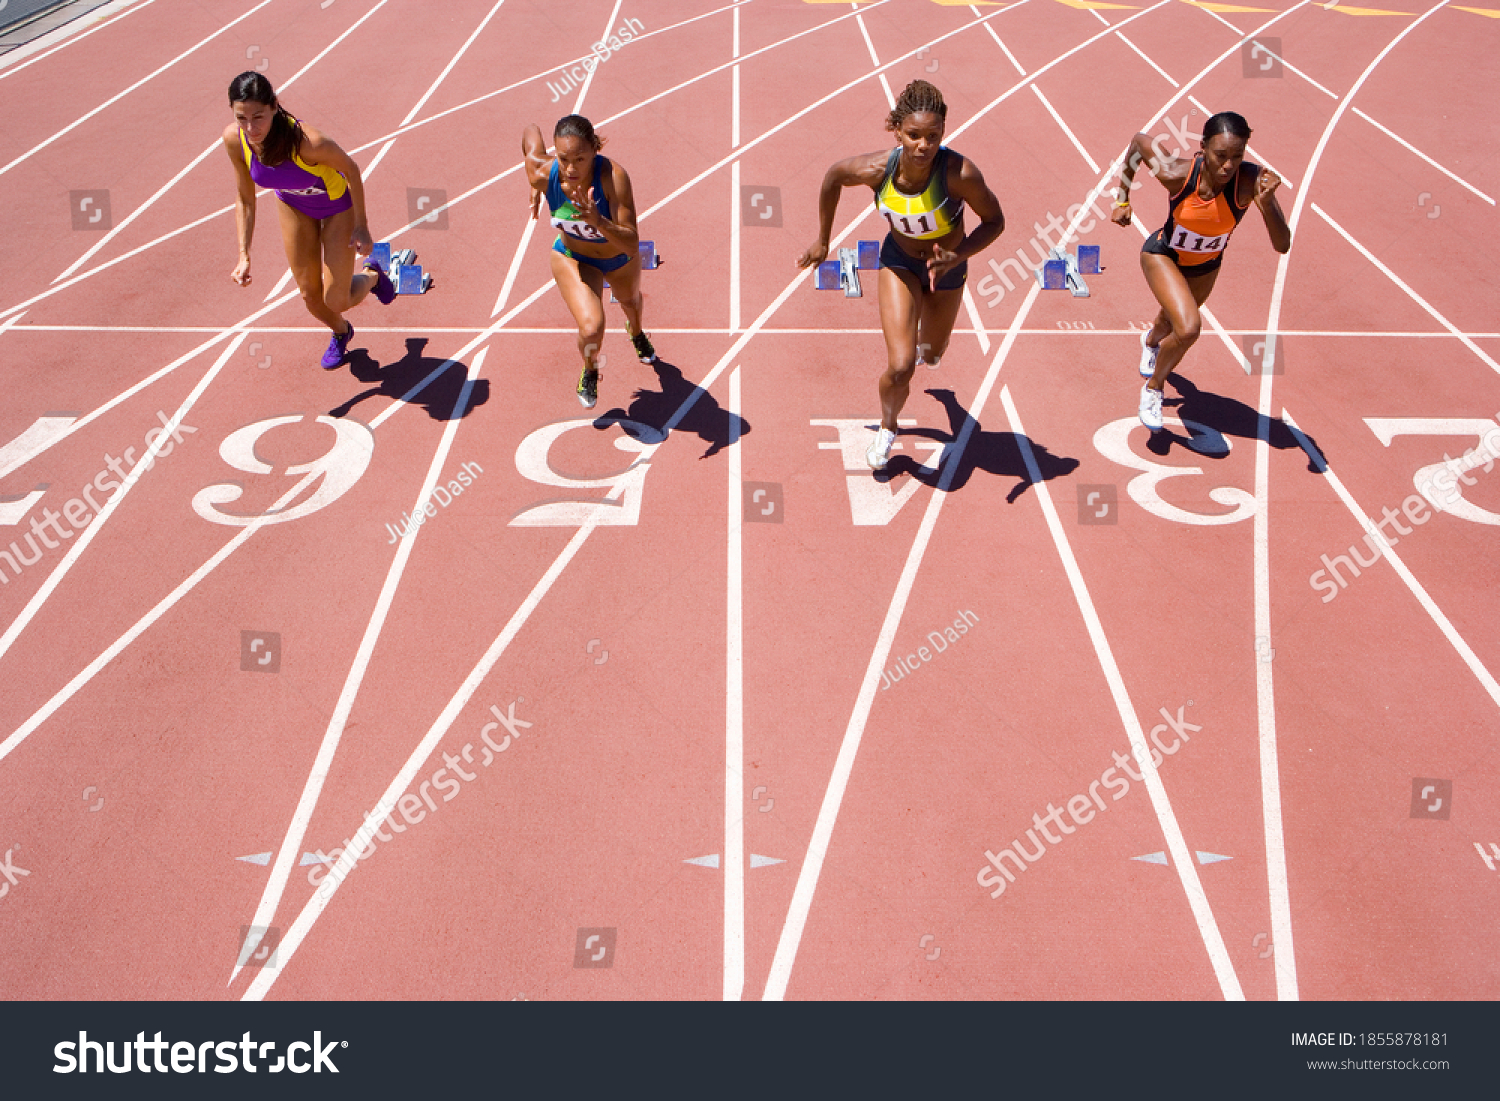 Female athletes setting off from their starting blocks at the start of a sprint race at an athletics competition at the track #1855878181